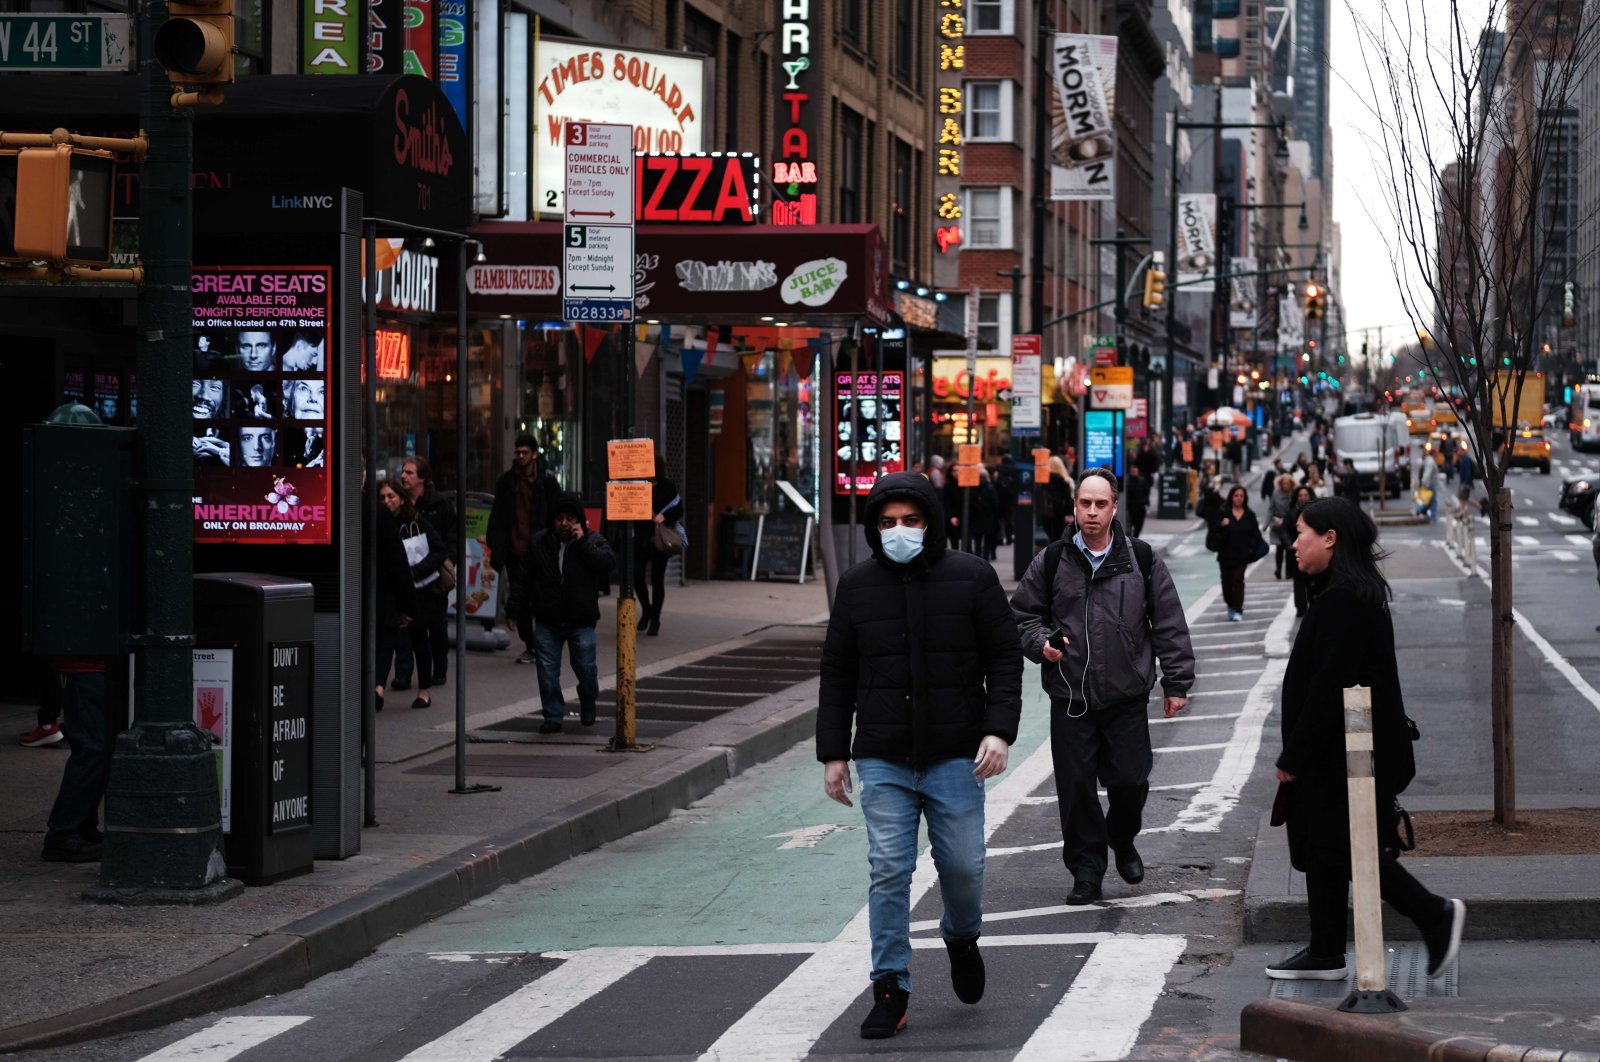 People walk near the Theater District in Manhattan on March 12 in New York City. New York City's Broadway theaters will need to close by 5 p.m. Thursday after New York Gov. Andrew Cuomo announced a ban on gatherings of 500 people or more amid the growing coronavirus outbreak. (AFP Photo)